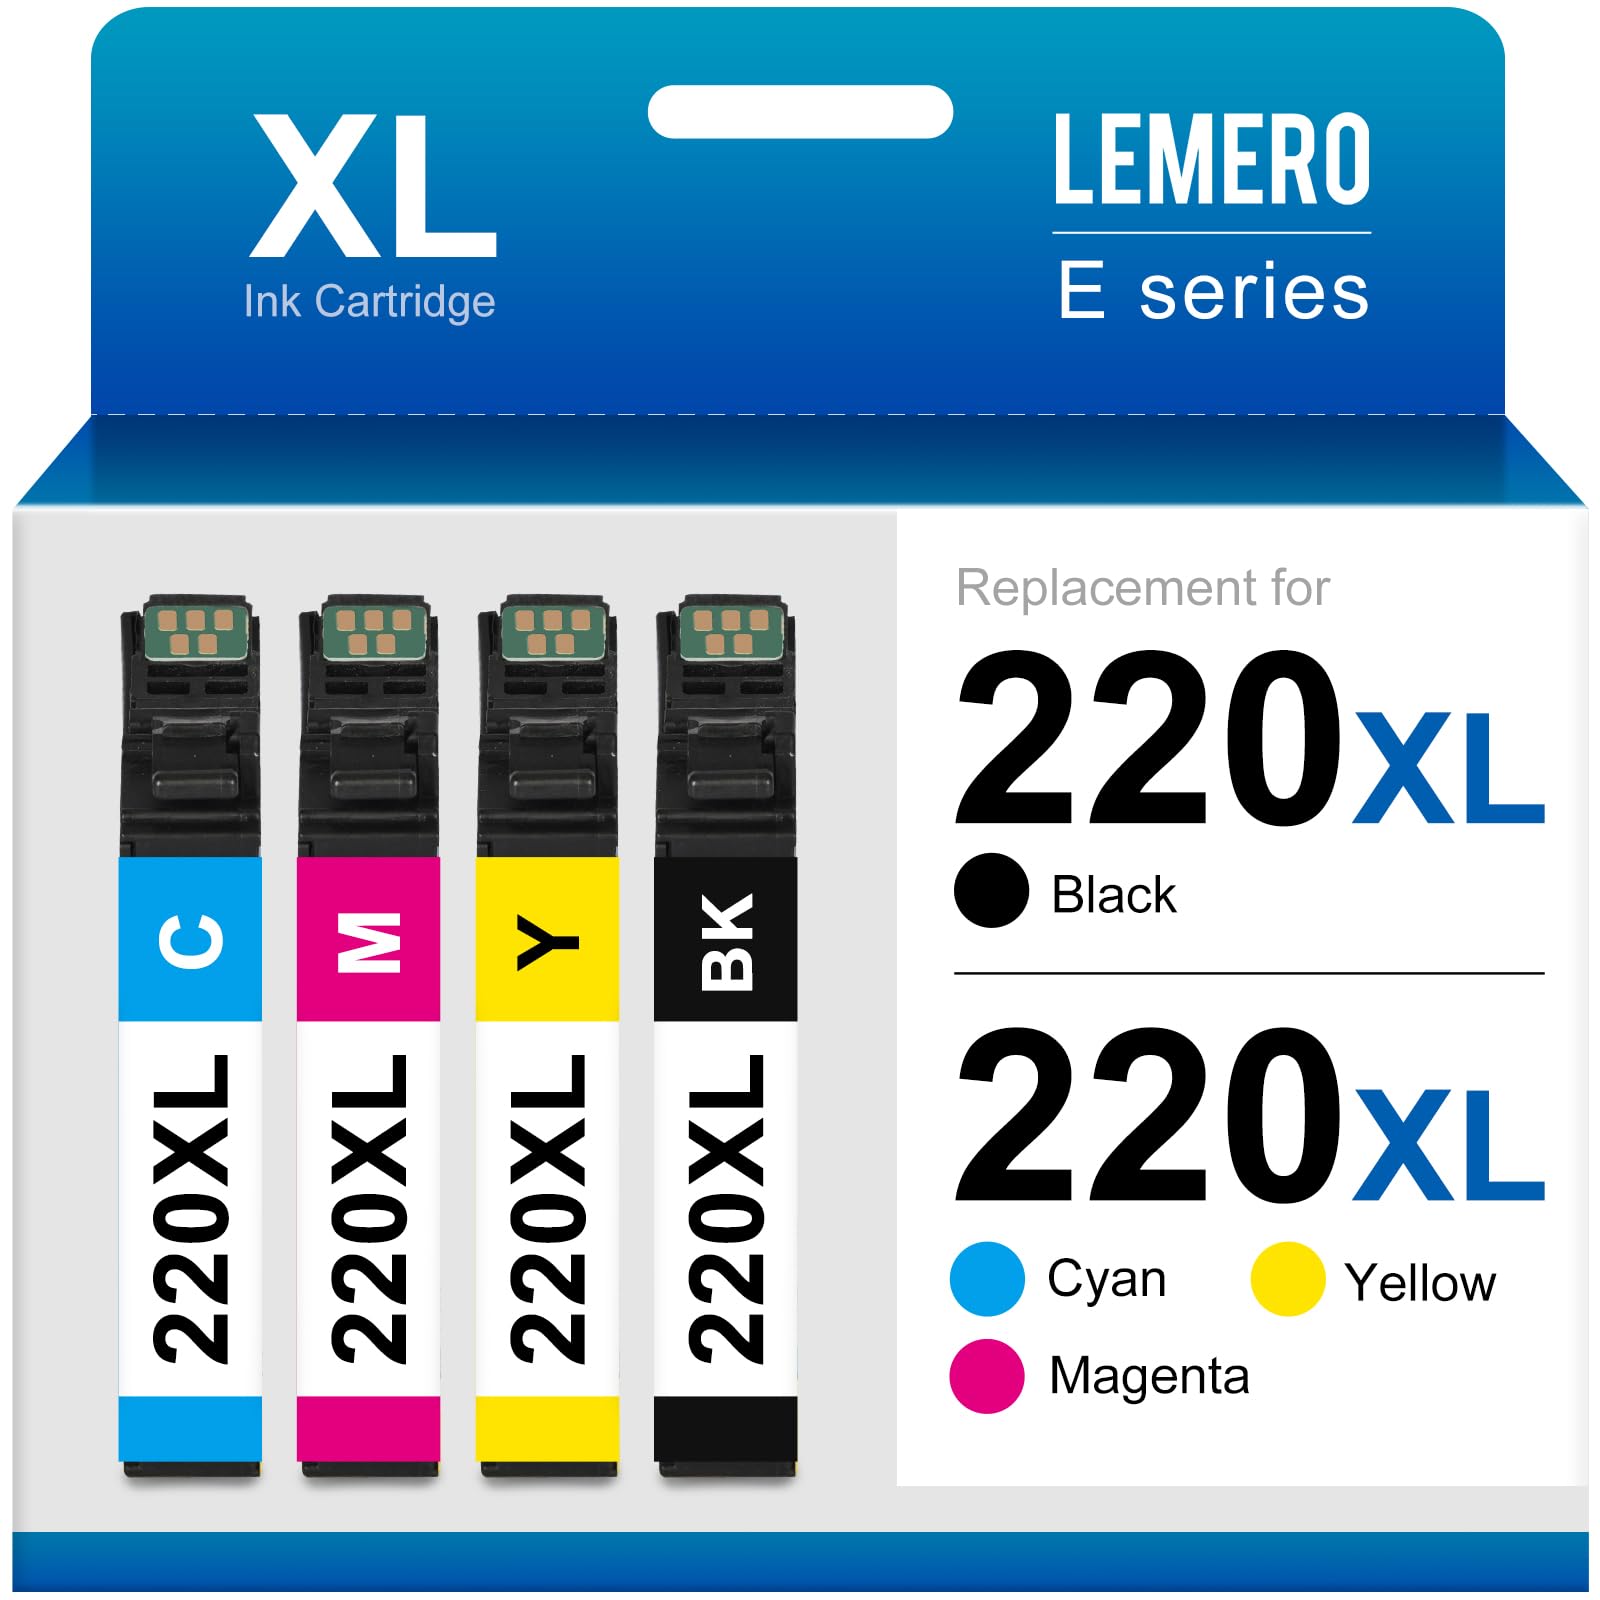 Epson Ink 220XL Cartridges compatible with Epson Workforce and Expression Series, featuring updated chip for perfect printer fit.